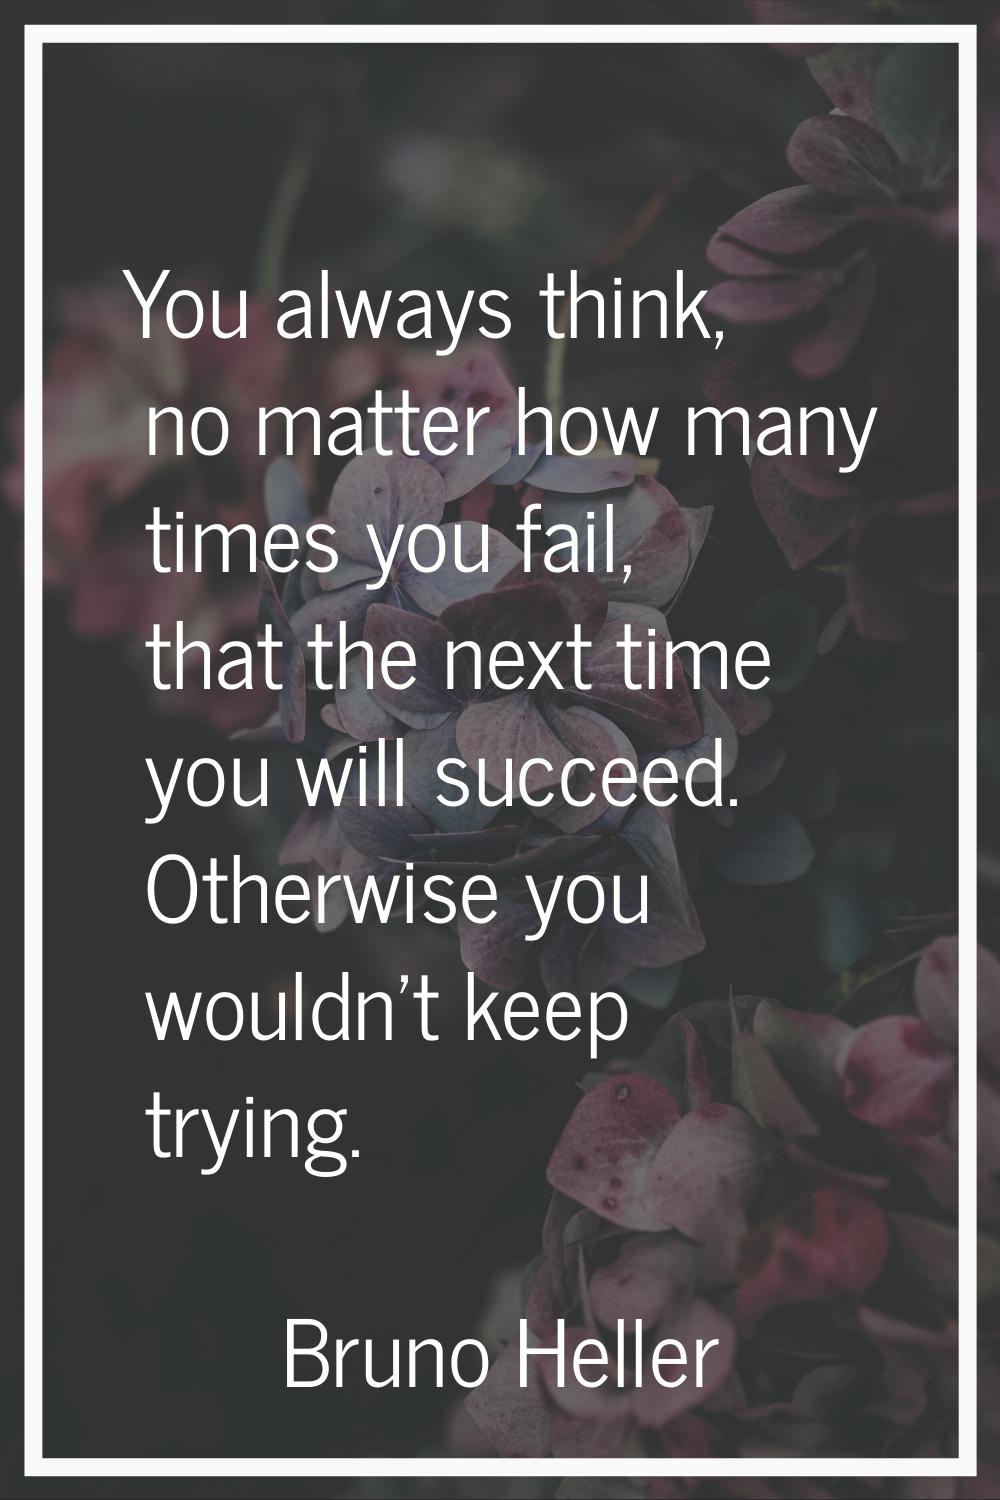 You always think, no matter how many times you fail, that the next time you will succeed. Otherwise